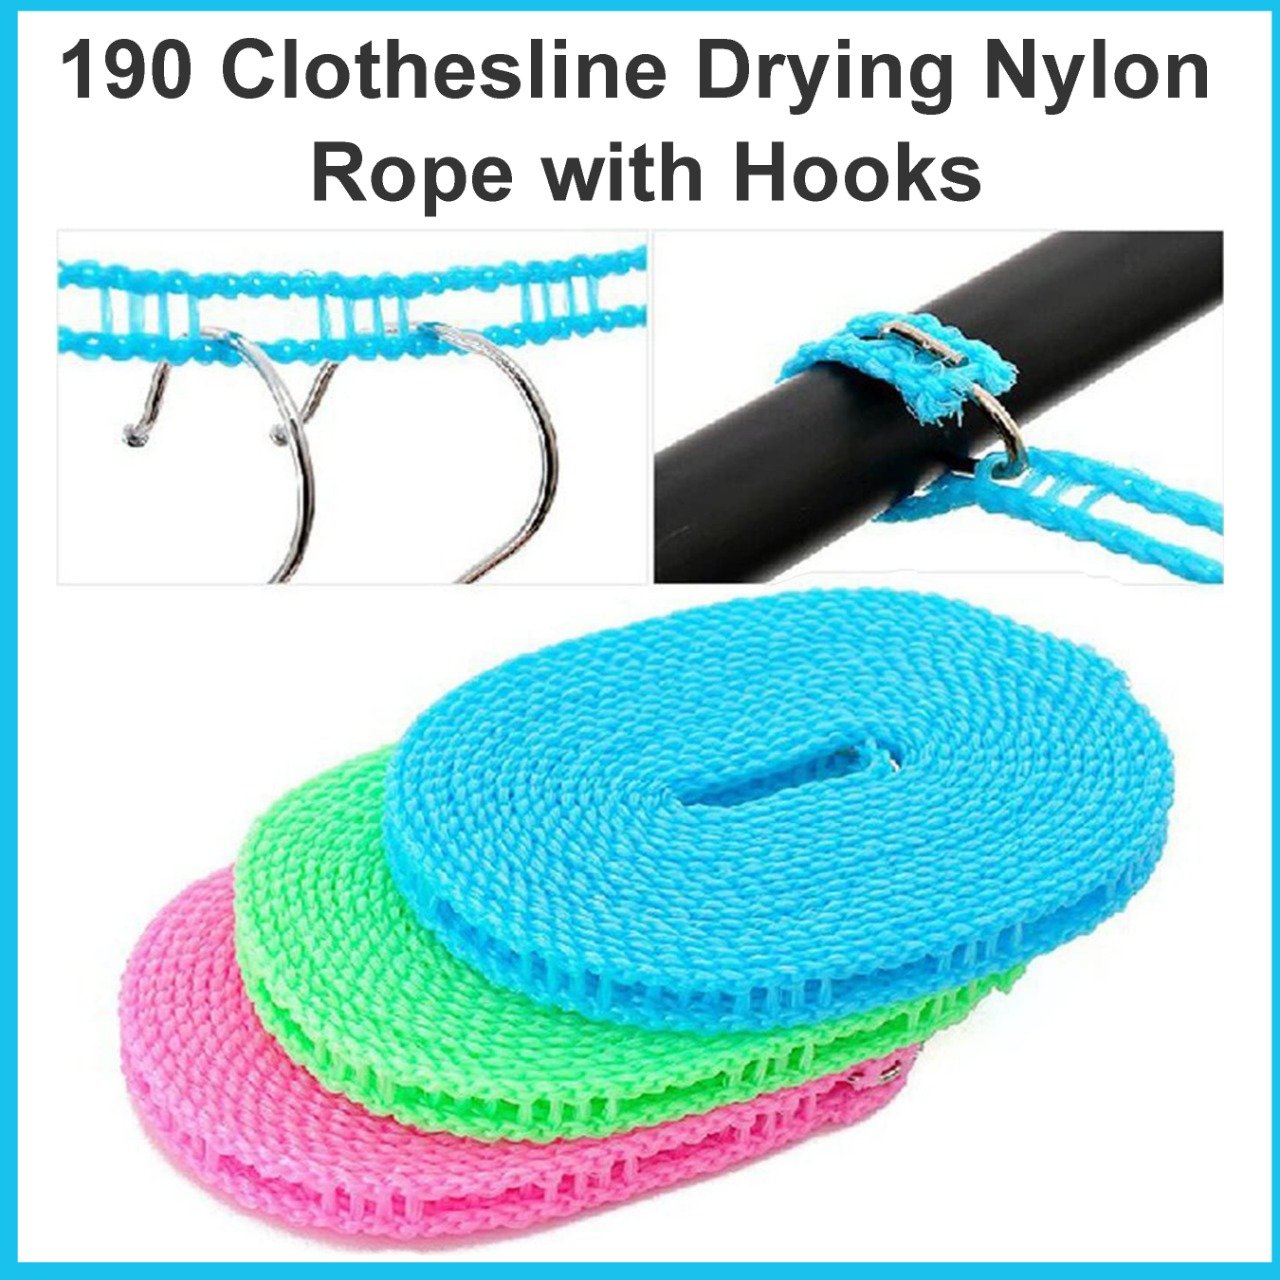 meters windprood anti slip clothes washing line drying nylon rope with hooks